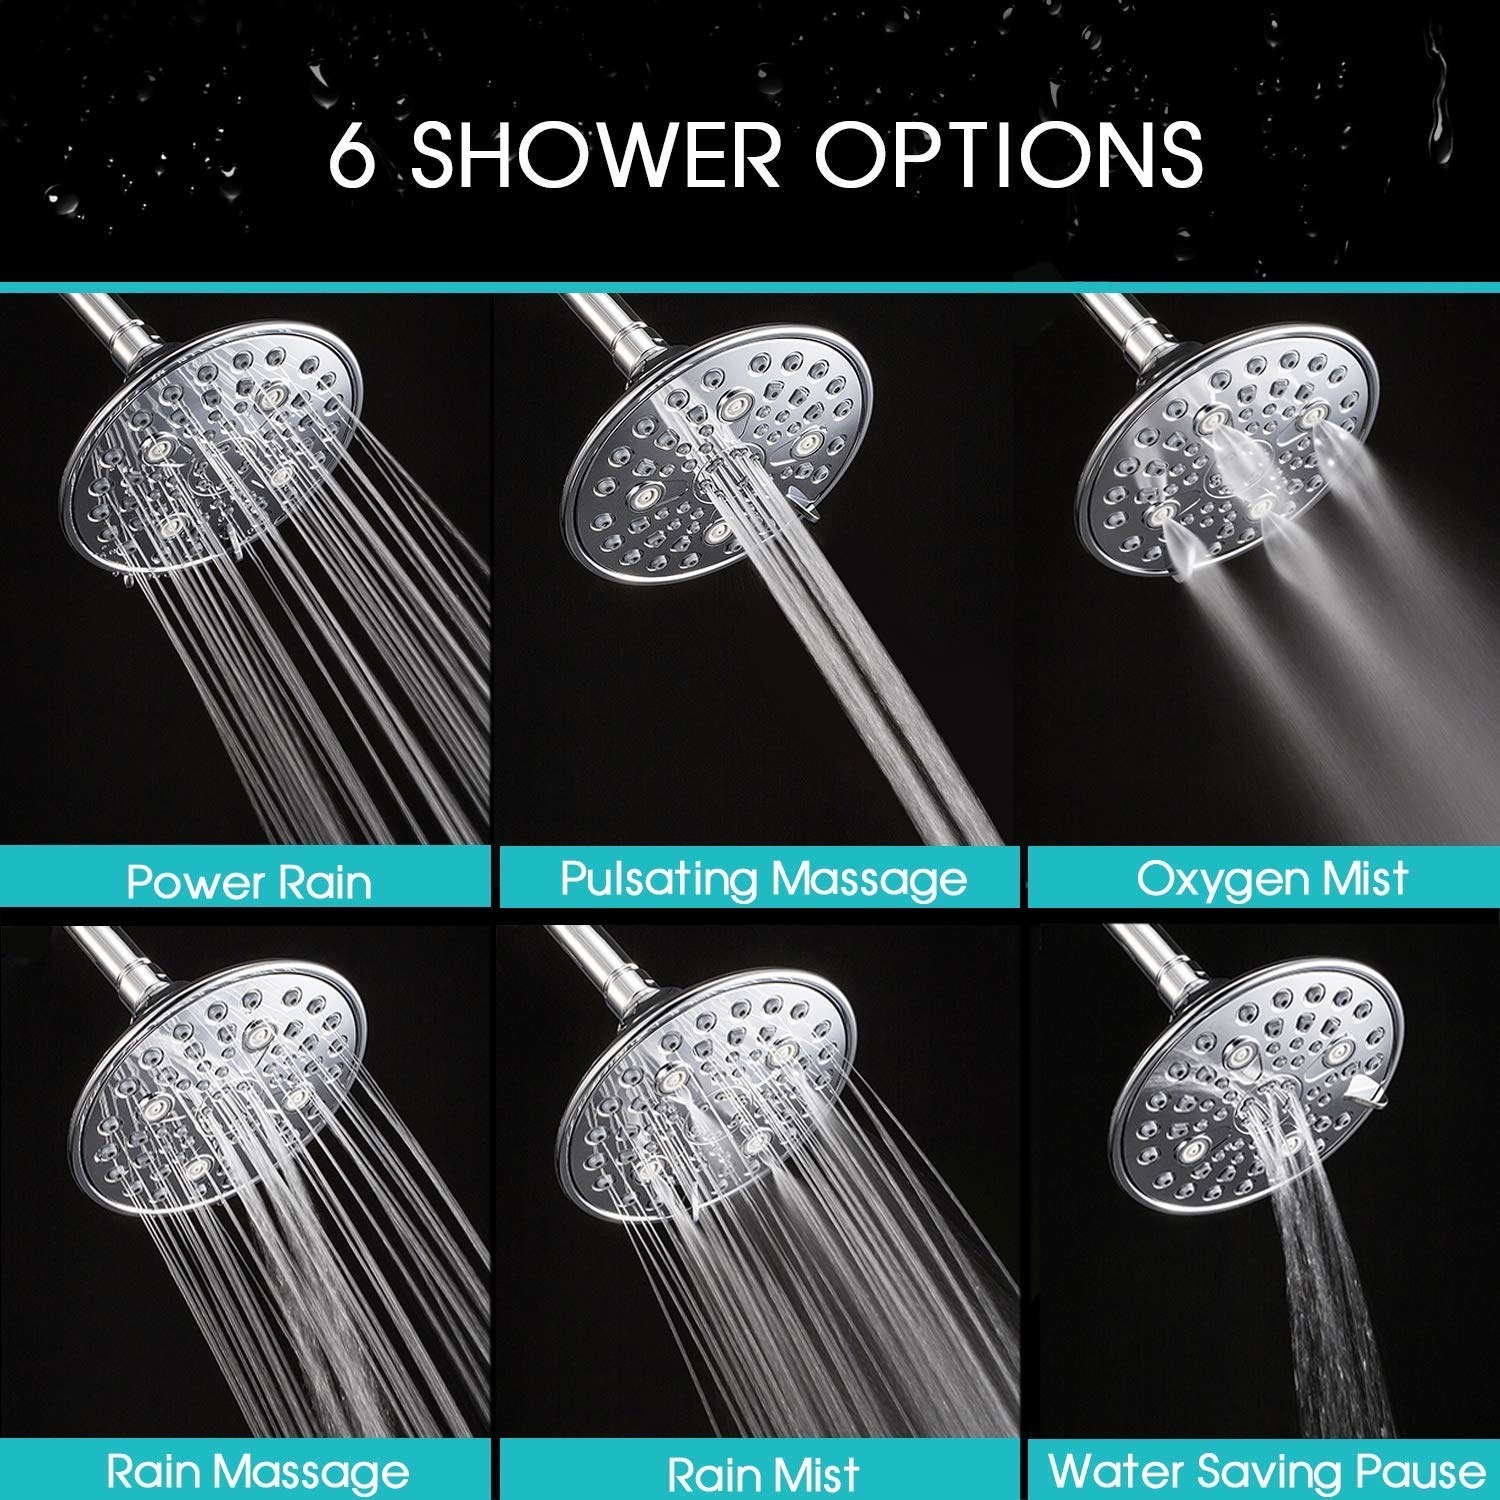 Showerhead with the pictures of the different flows